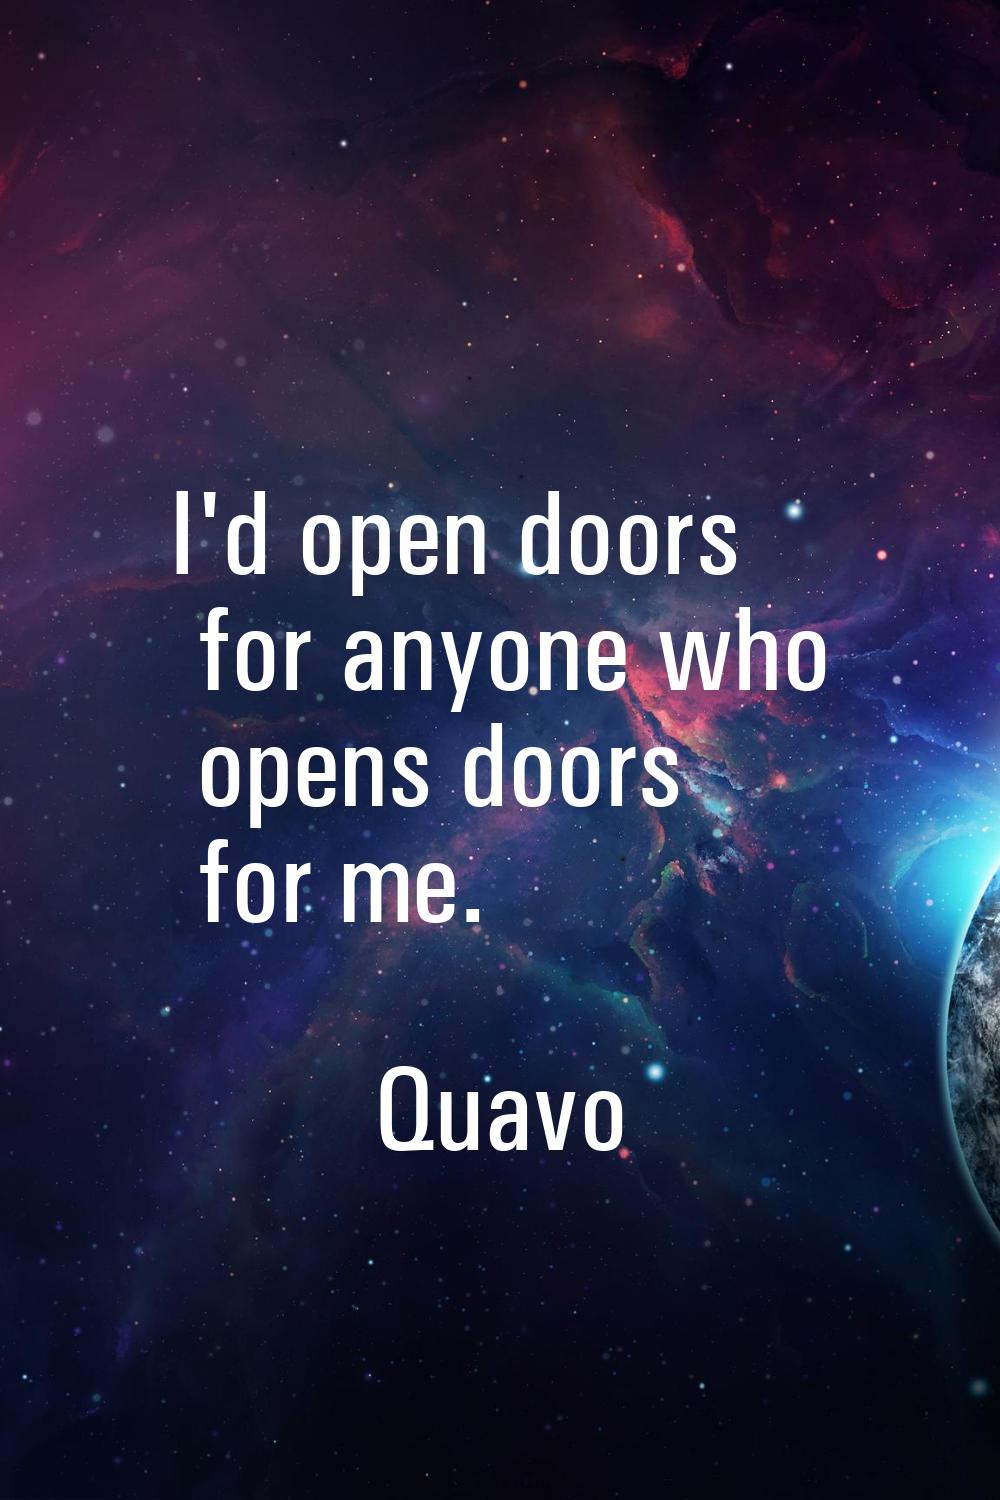 I'd open doors for anyone who opens doors for me.